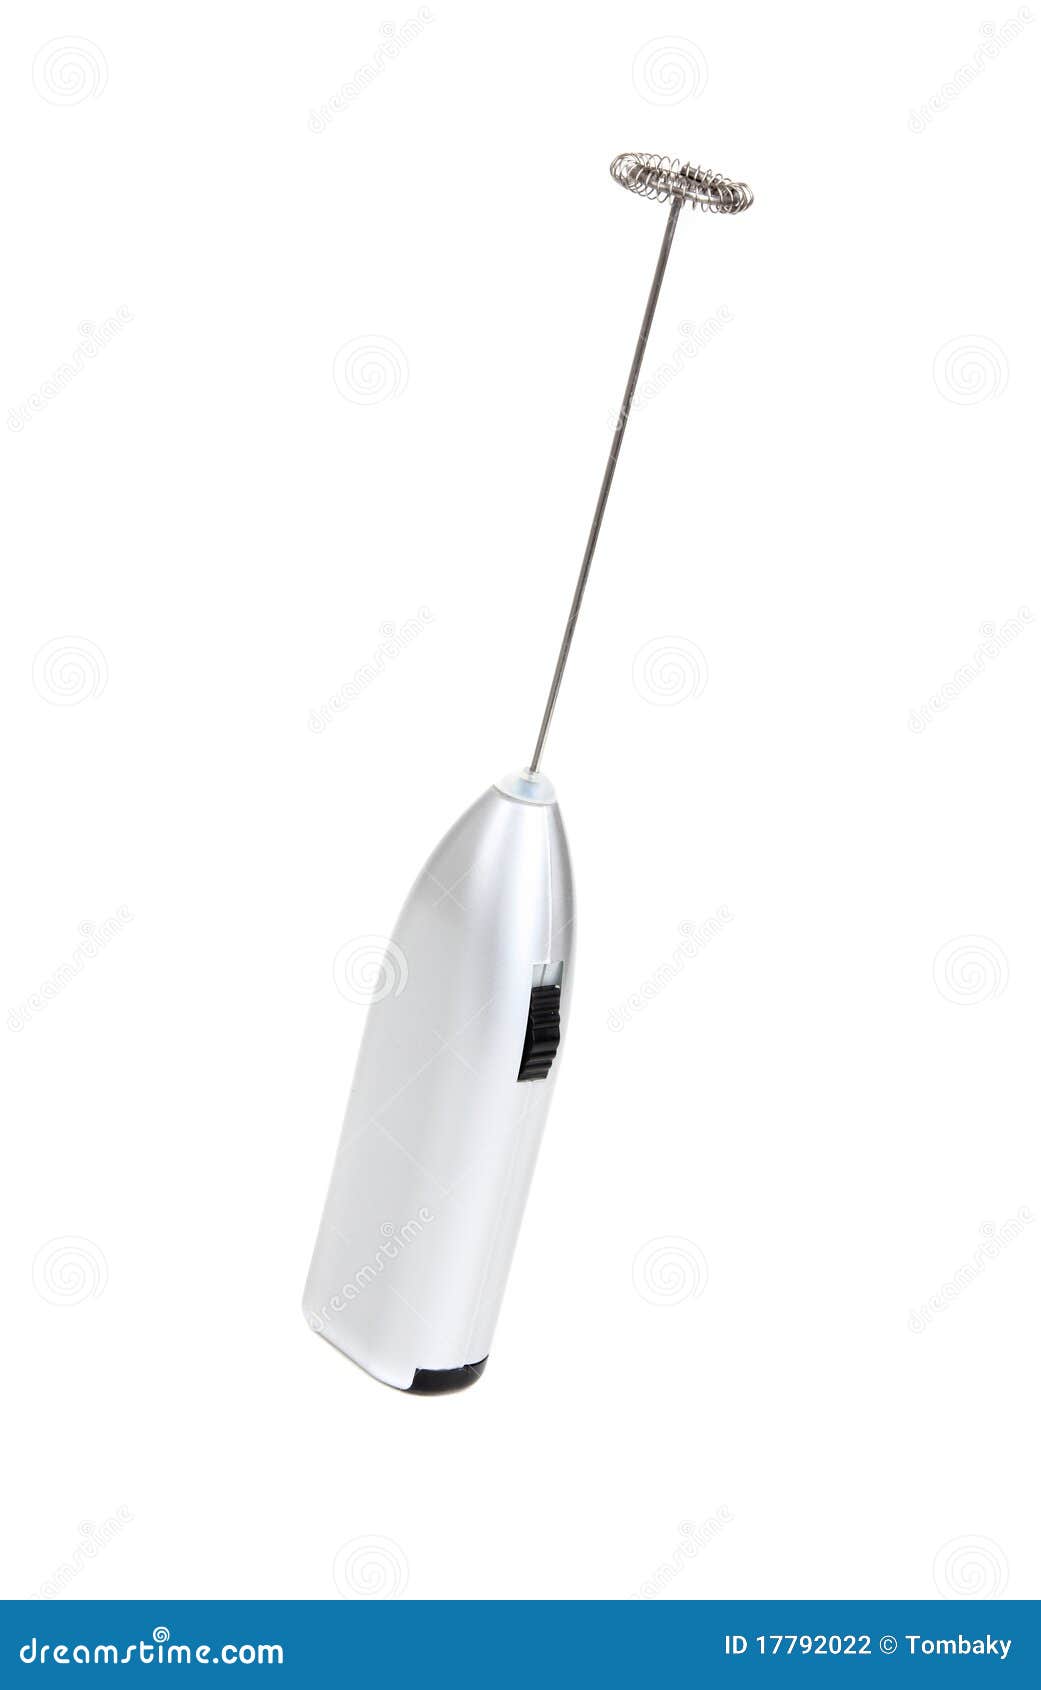 https://thumbs.dreamstime.com/z/small-electric-whisk-17792022.jpg